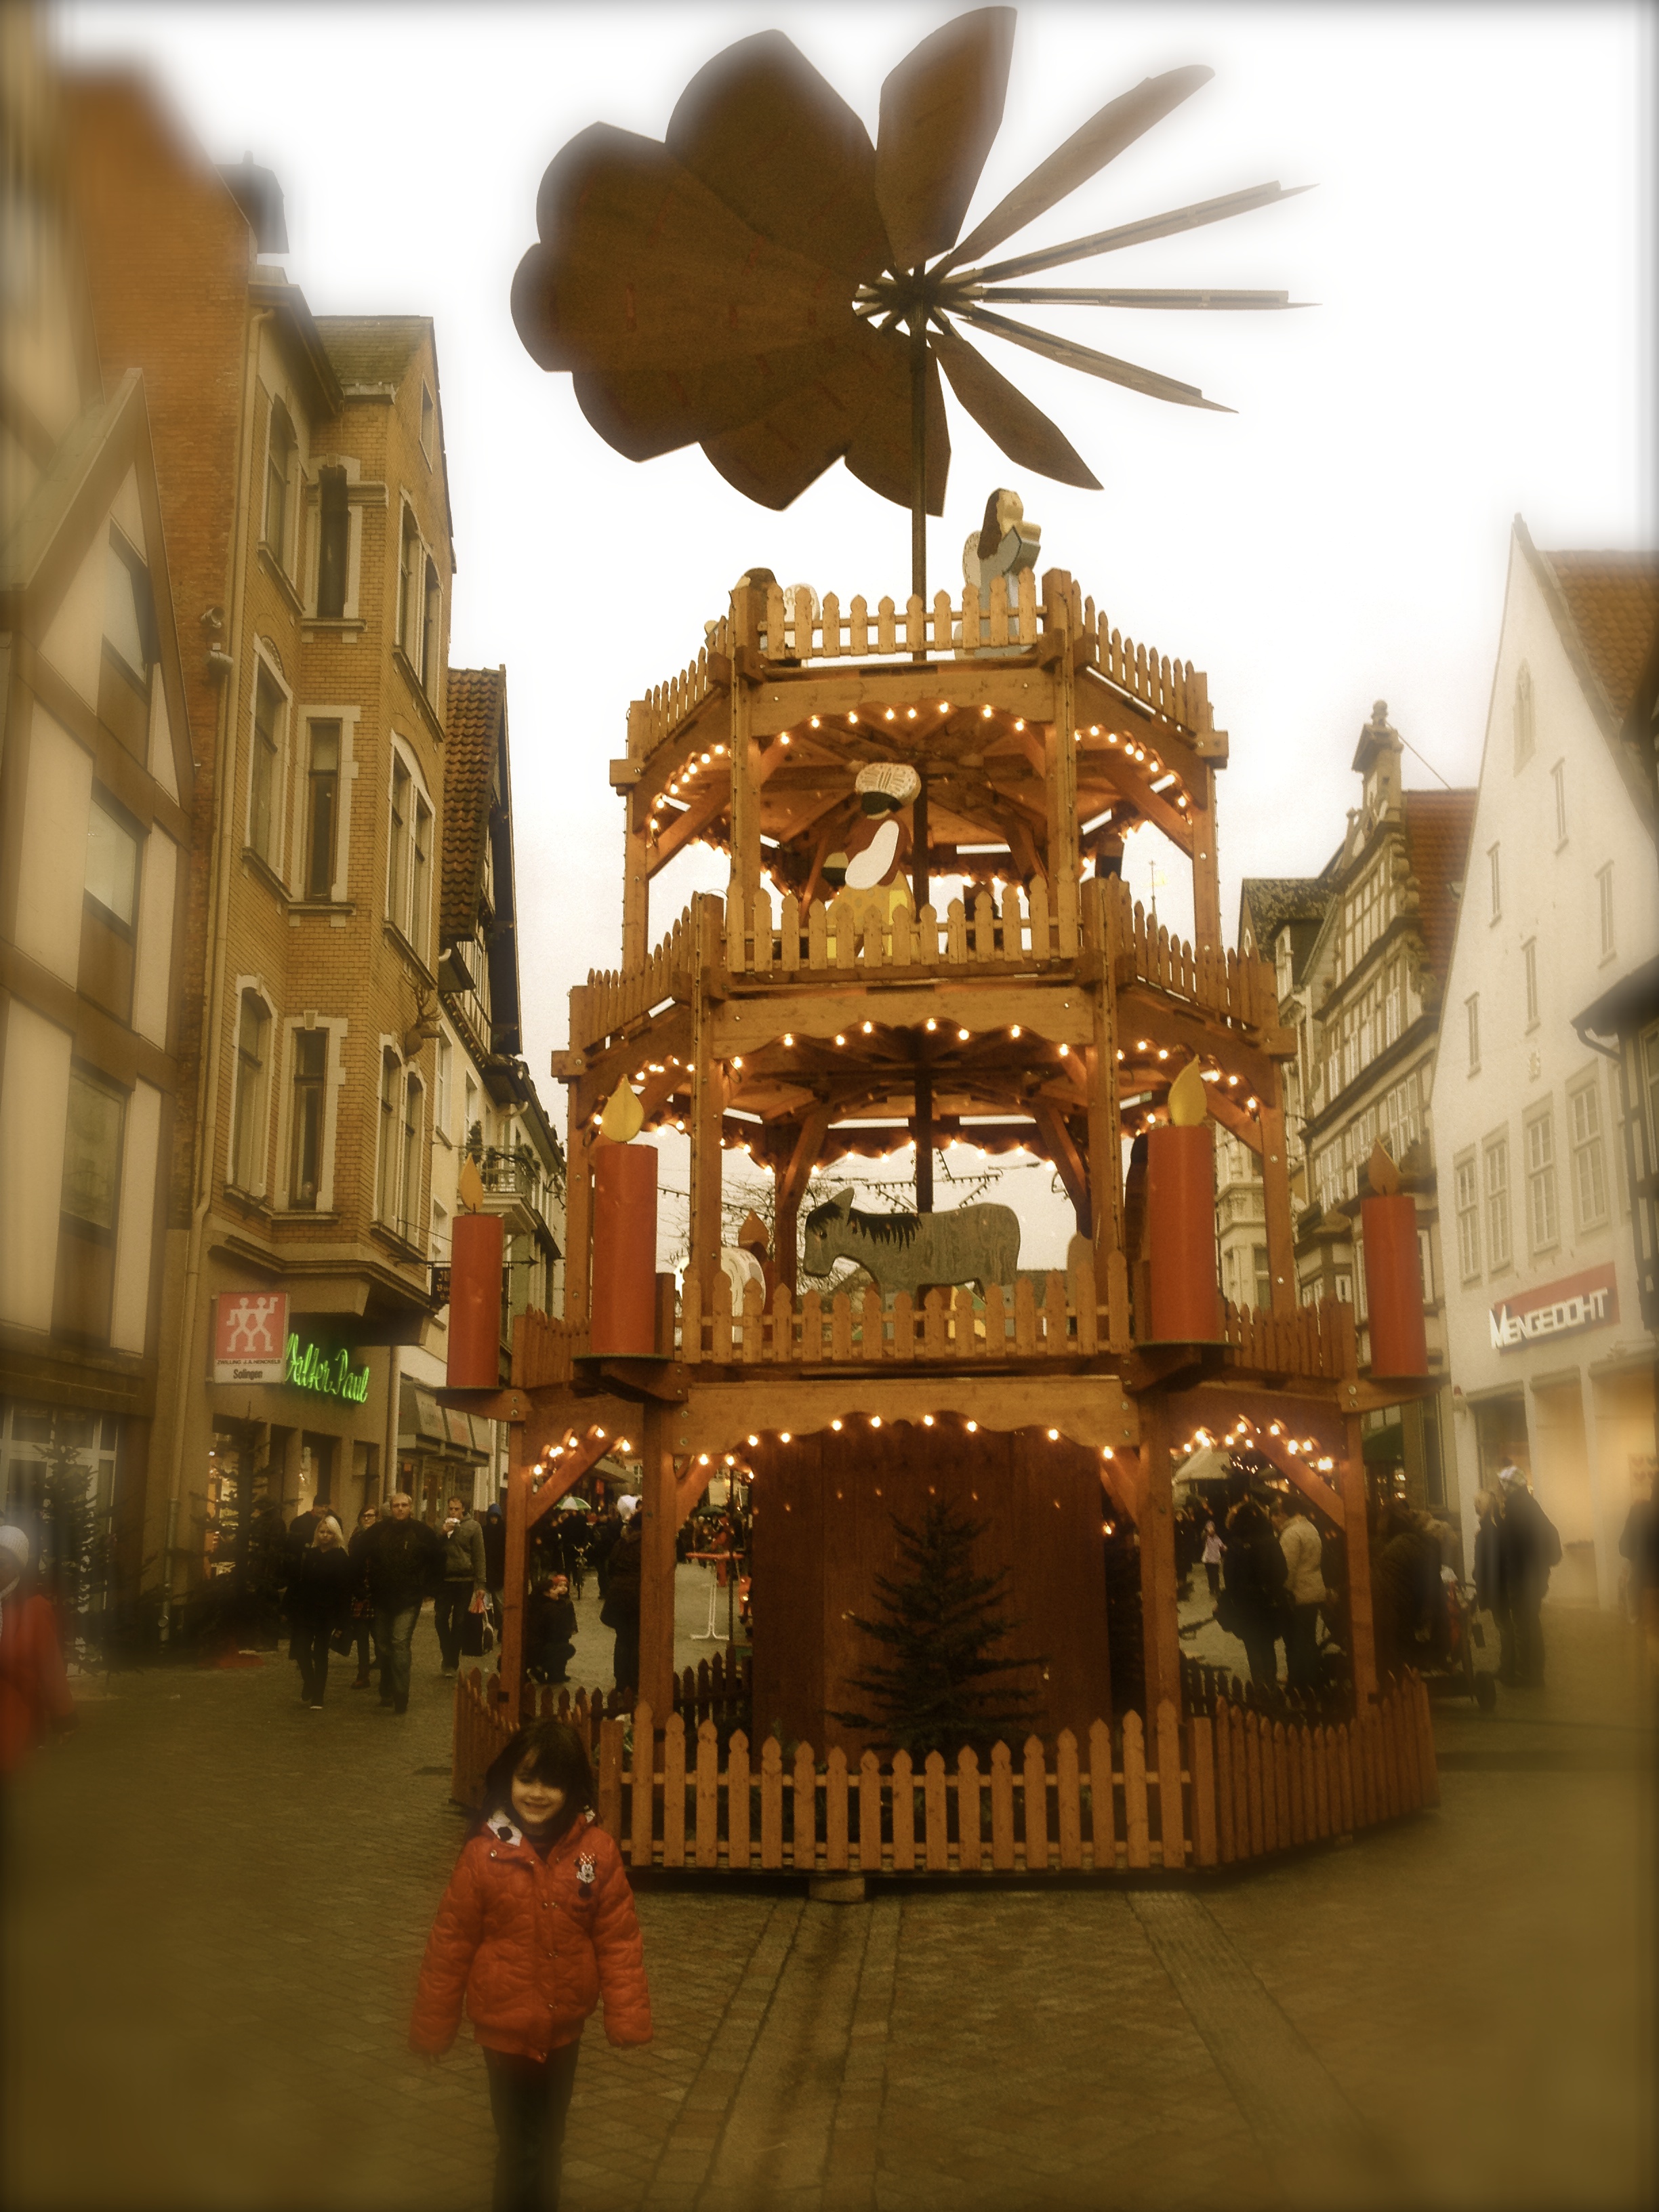 Follow the Pied Piper to Hameln’s Christmas Market!